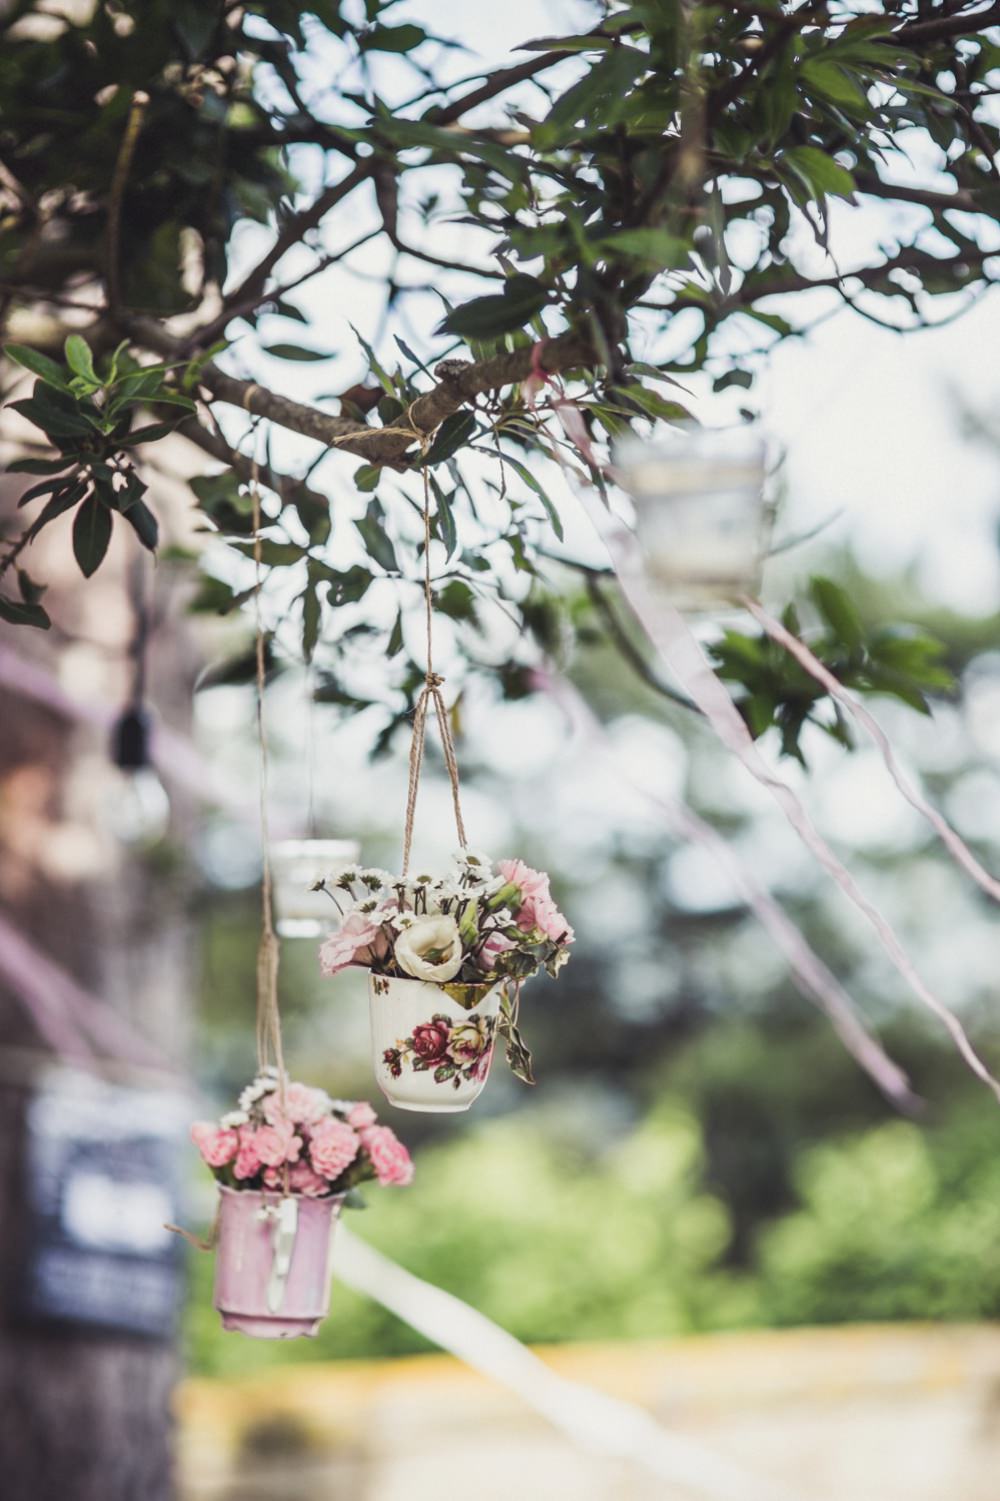 teacups with flowers hanging from trees